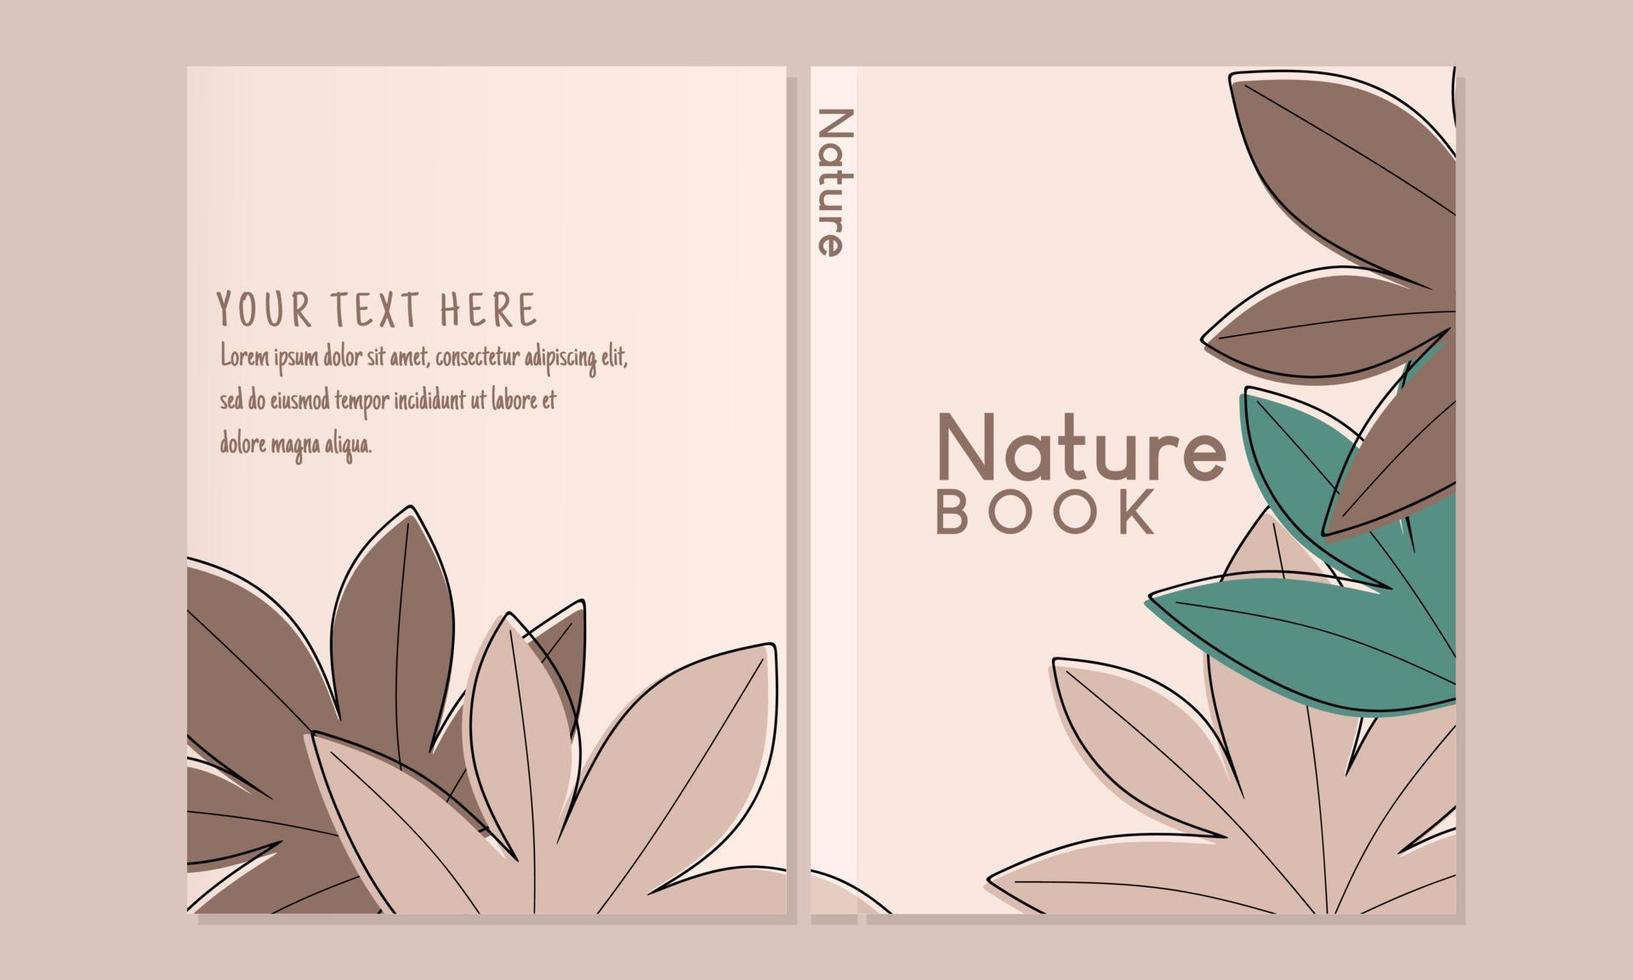 botanical style page cover set. For notebooks, planners, brochures, books, catalogs etc.abstract background with hand drawn palm leaf elements vector